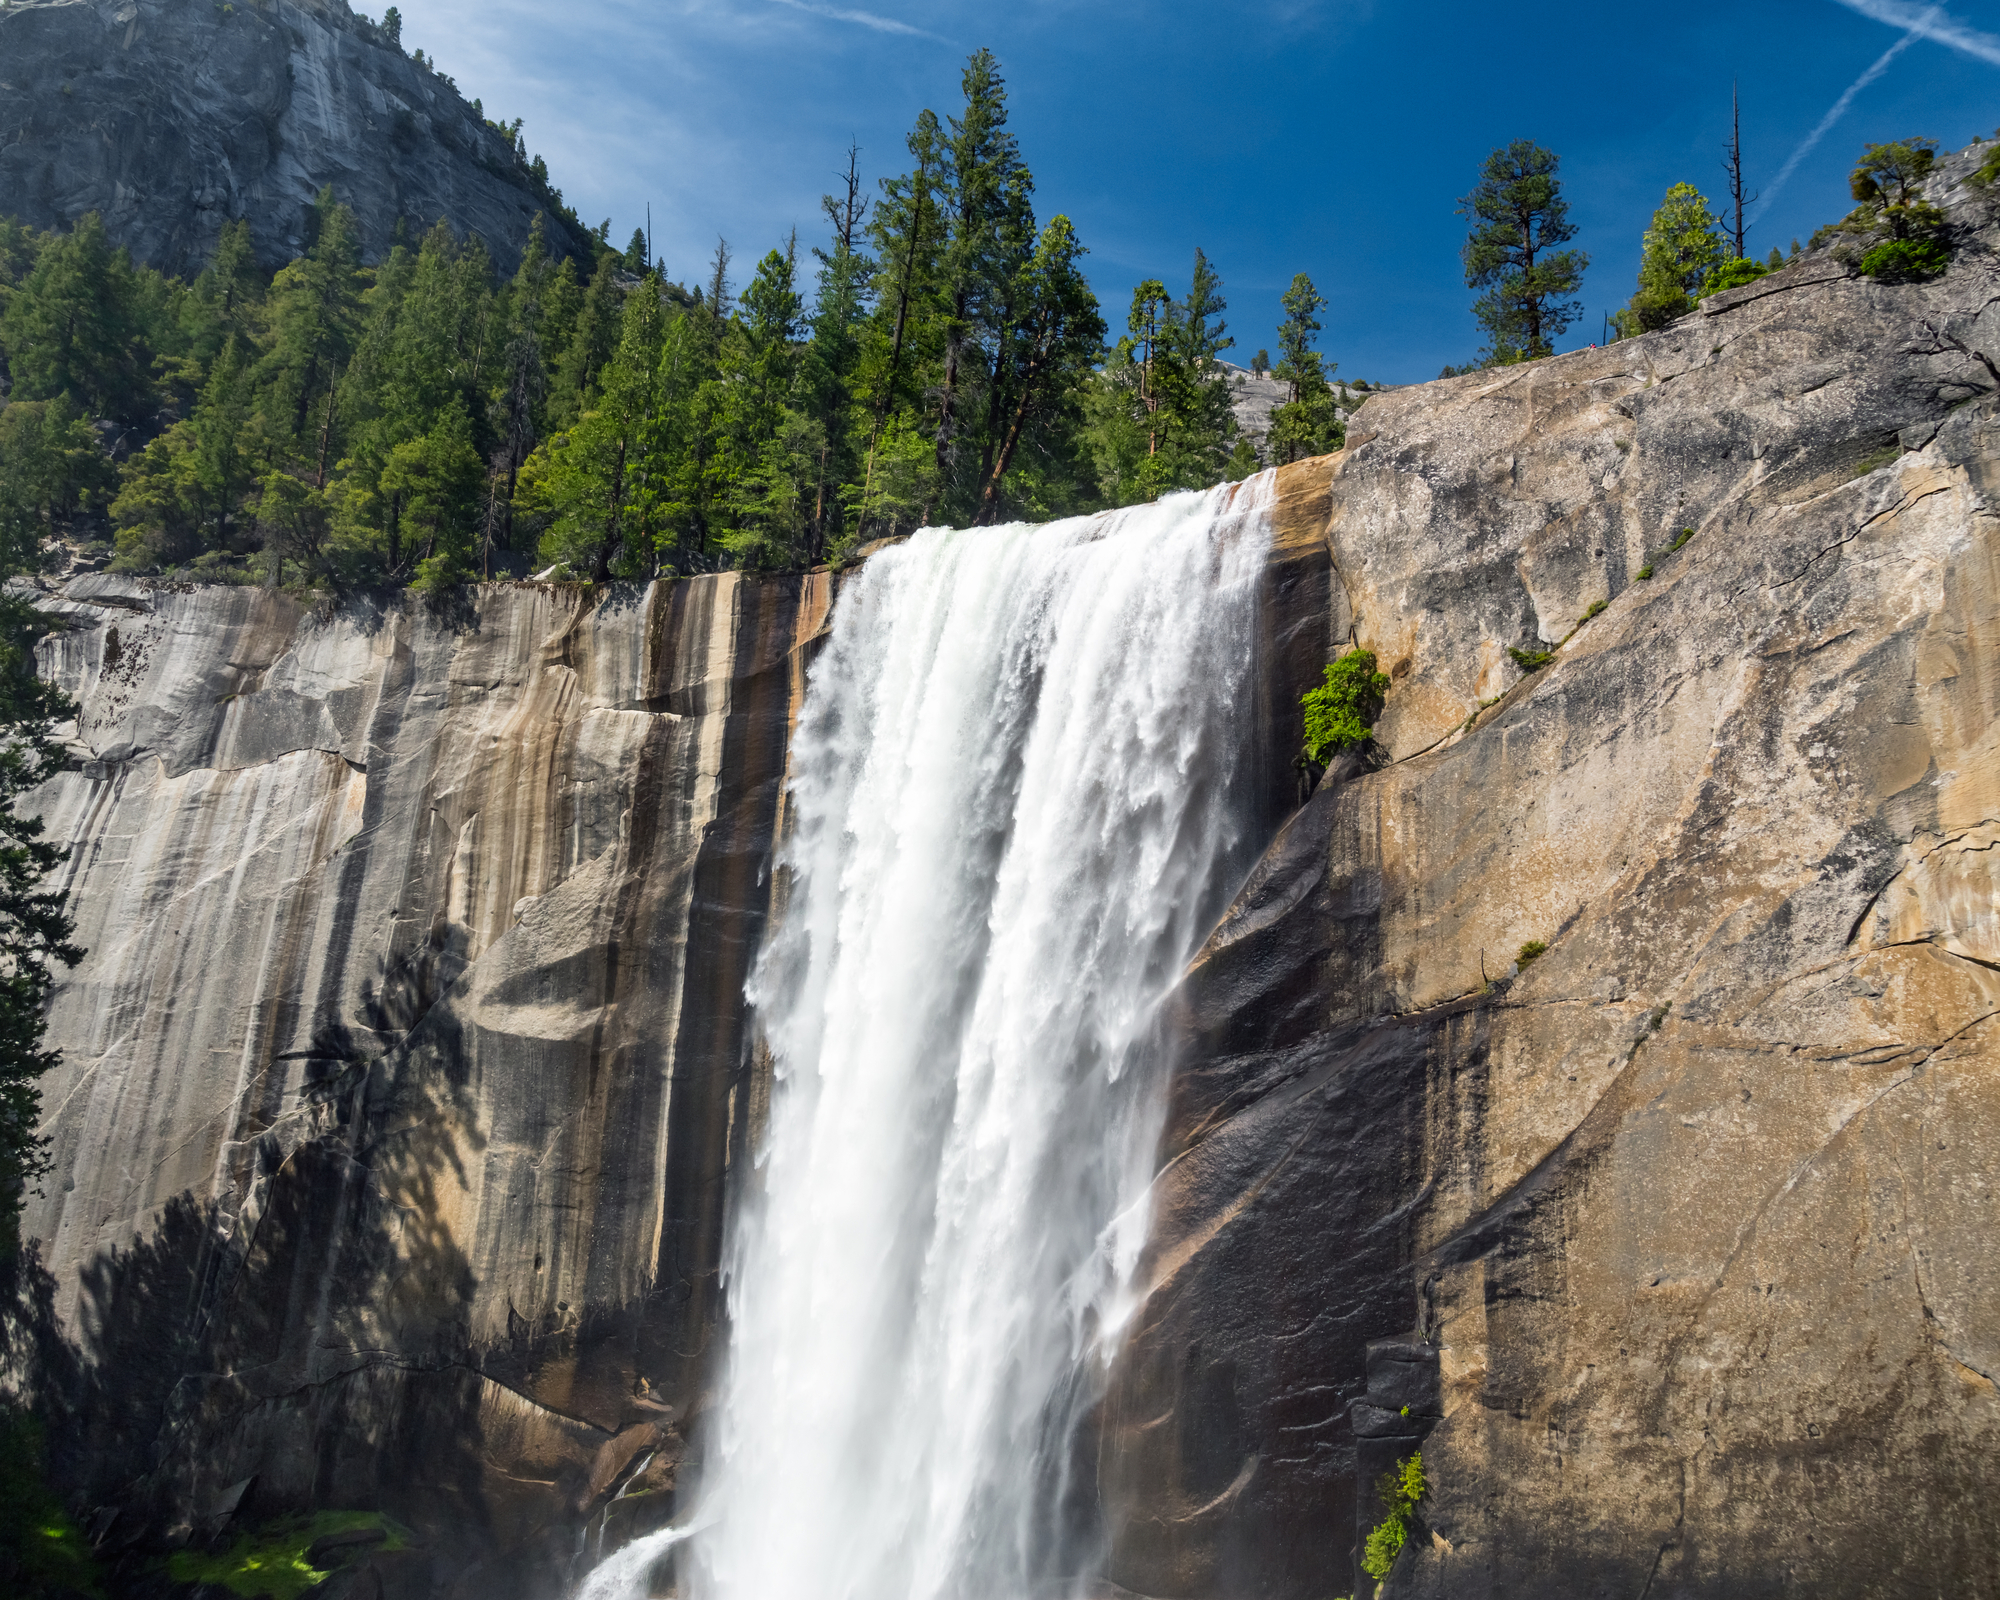 Vernal Fall in Yosemite National Park from hike trail